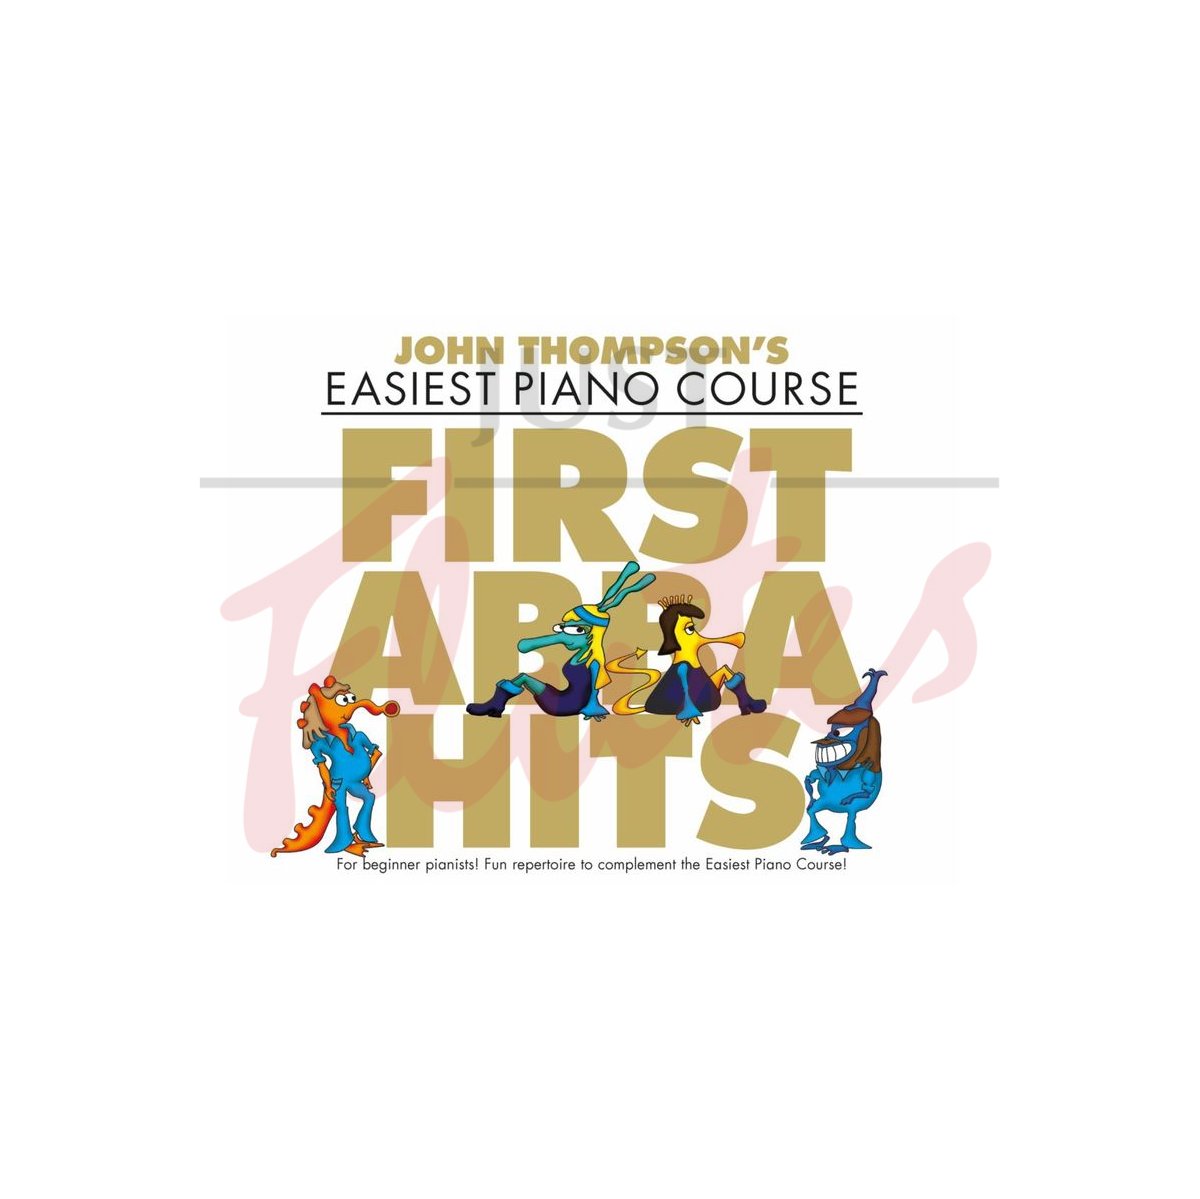 John Thompson's Easiest Piano Course - First Abba Hits